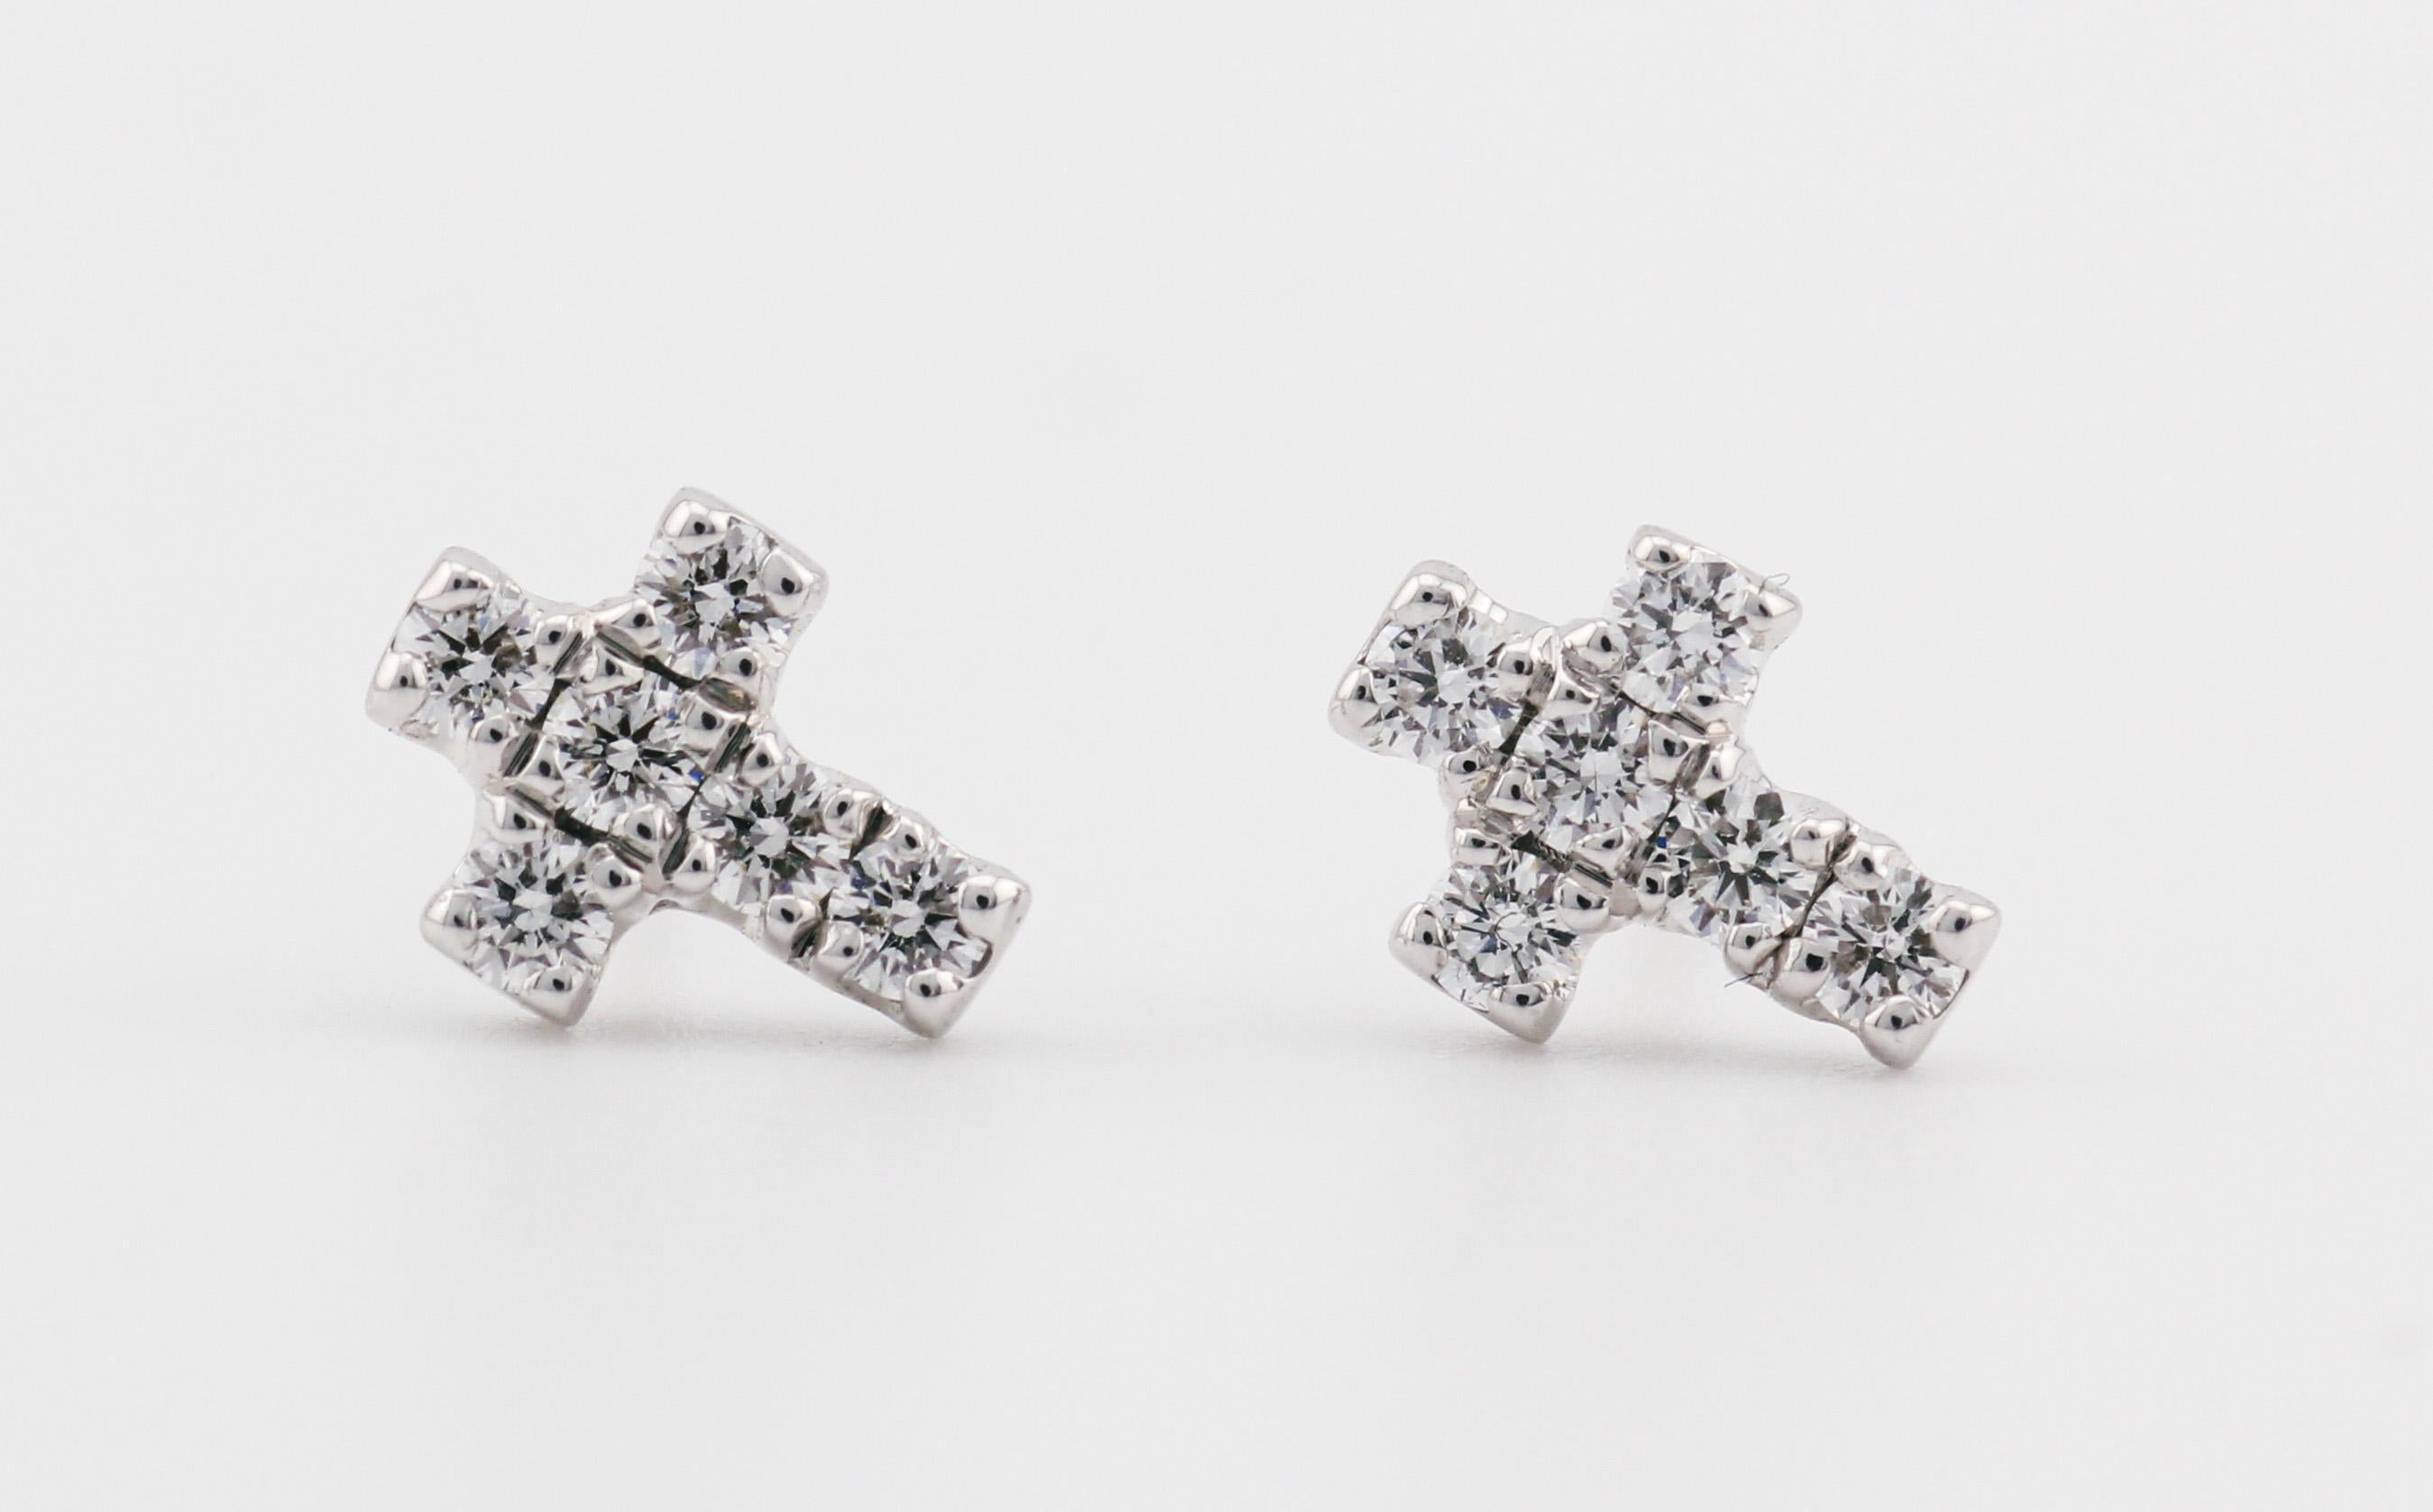 The Cartier Diamond 18 Karat White Gold Cross Stud Earrings are a sublime fusion of religious symbolism and high-end luxury craftsmanship, brought to life by the esteemed house of Cartier. These earrings exude an understated elegance that speaks